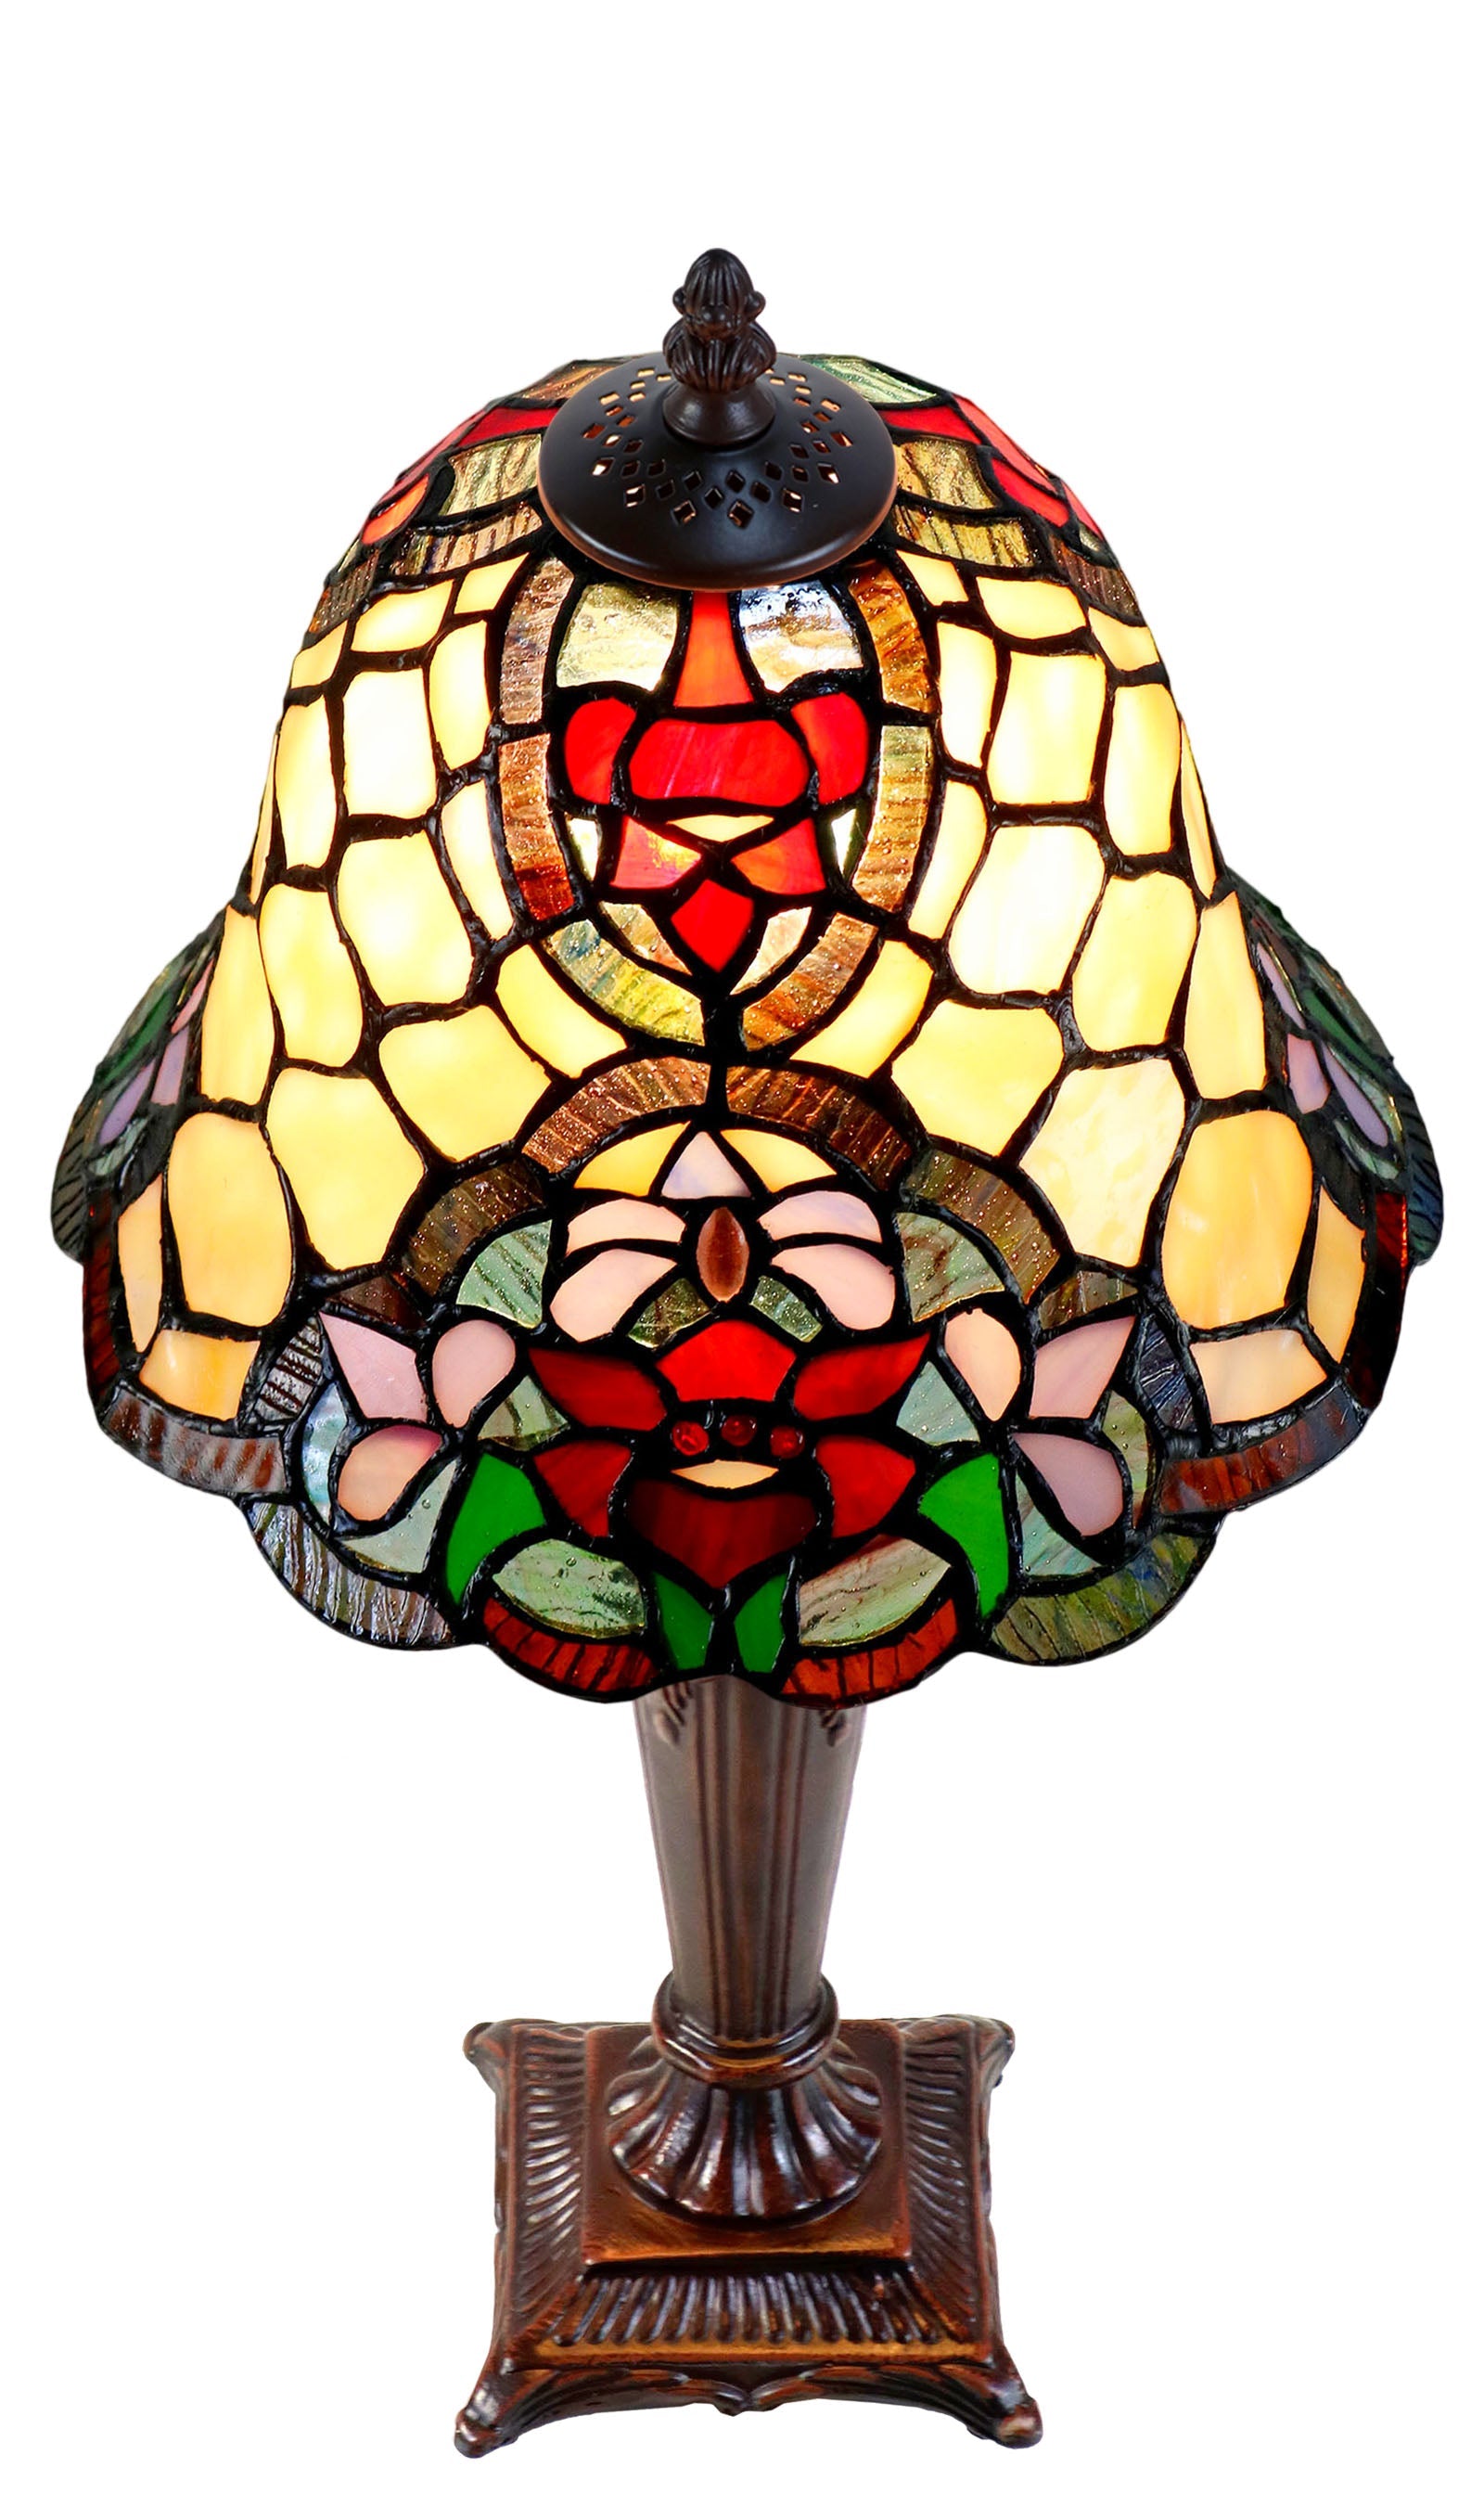 10"  Traditional Alicia Tiffany Style Stained Glass Table Lamp